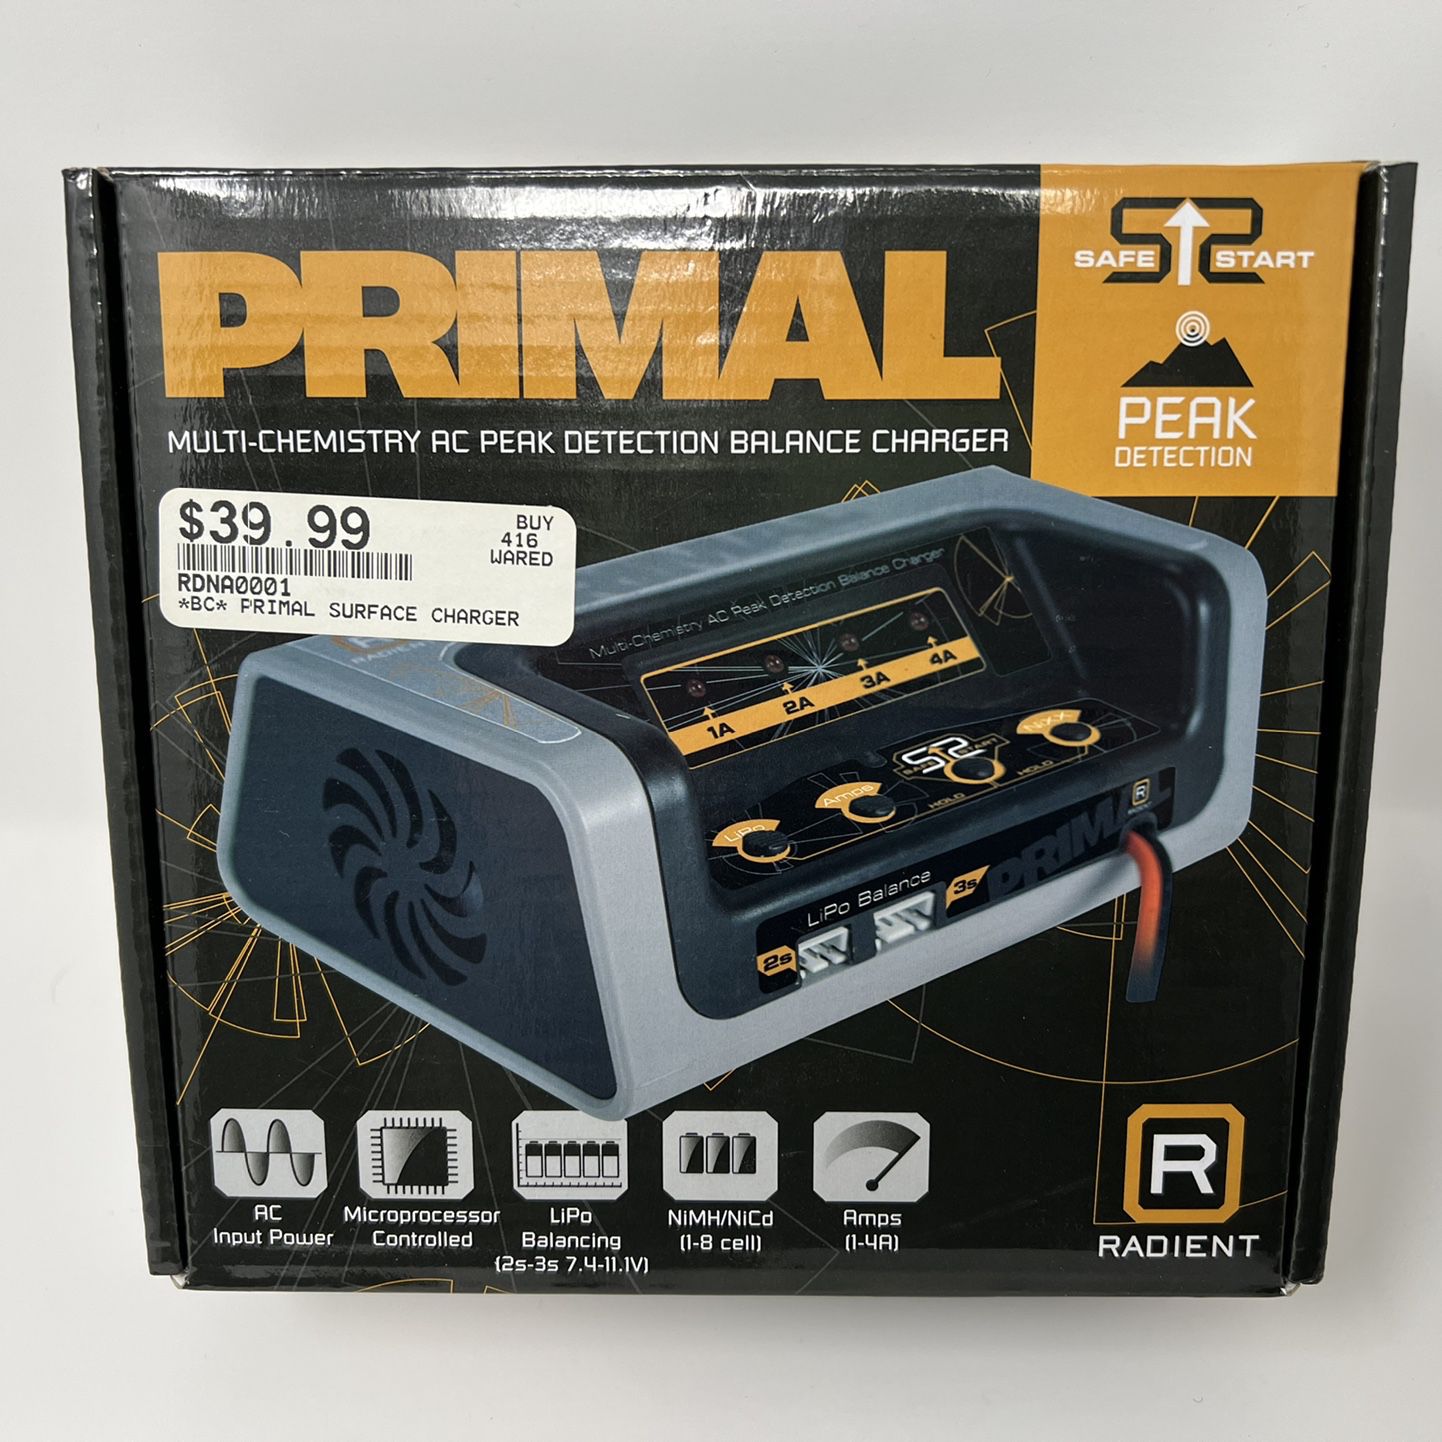 Primal Lipo Nimh Radiant Balance Charger + Battery for Sale in Issaquah, WA  - OfferUp